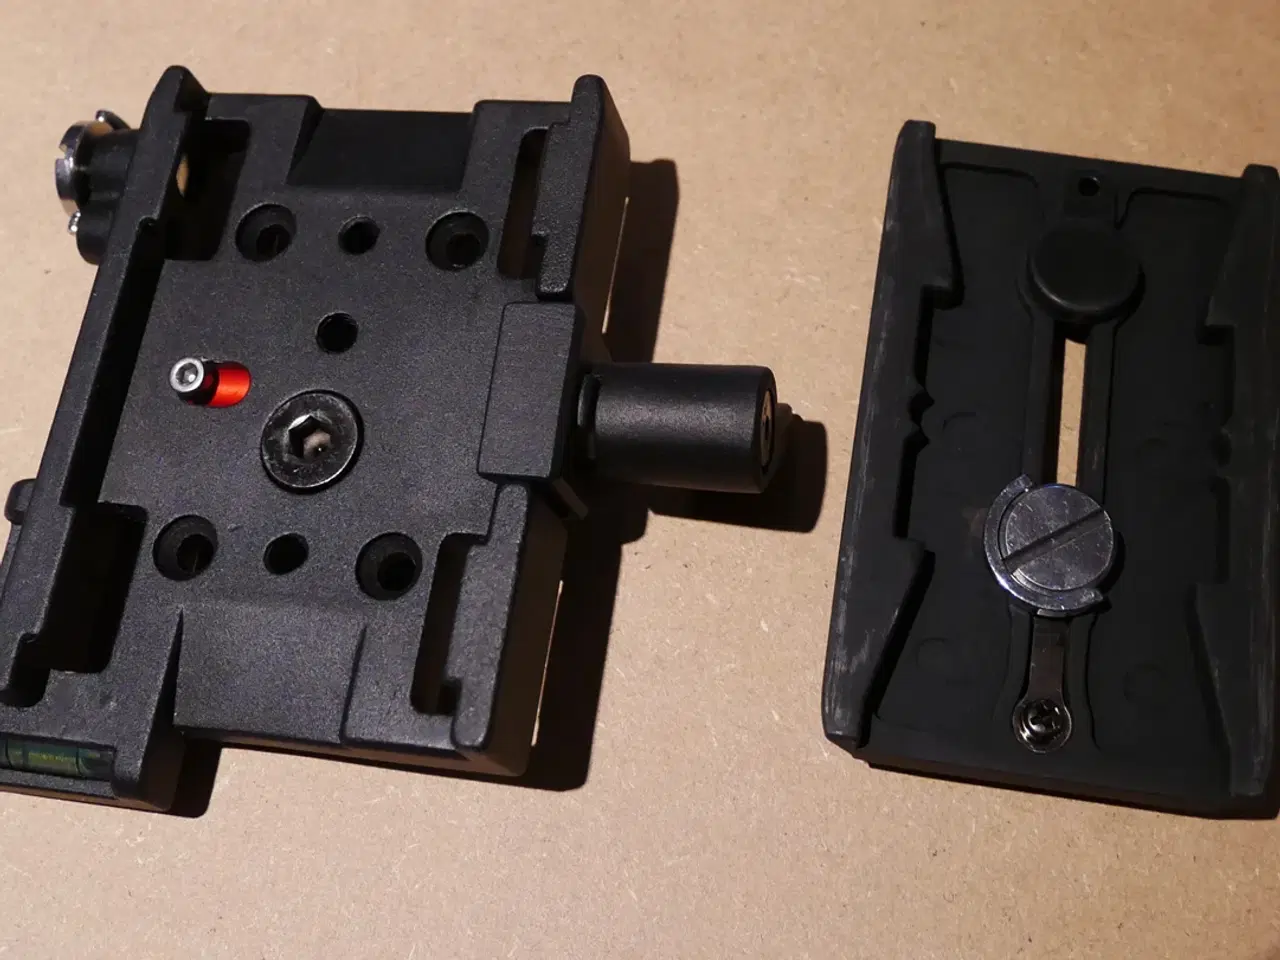 Billede 3 - Giottos mh 621 quick release plate